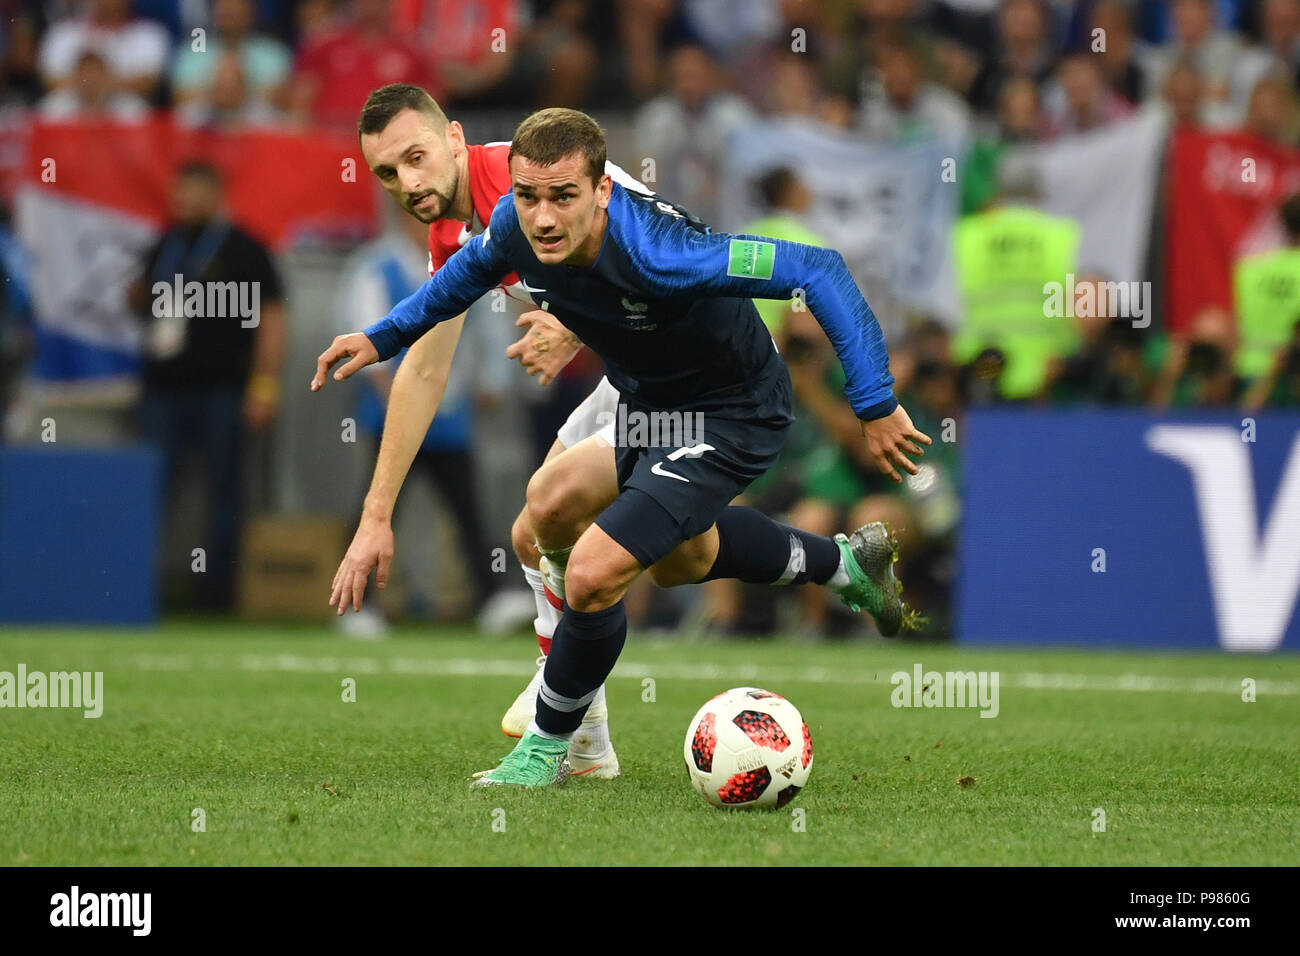 Antoine GRIEZMANN (FRA), action, duels versus Marcelo BROZOVIC (CRO). France (FRA) - Croatia (CRO) 4-2, Final, Game 64, on 15.07.2018 in Moscow; Luzhniki Stadium. Football World Cup 2018 in Russia from 14.06. - 15.07.2018. | usage worldwide Stock Photo